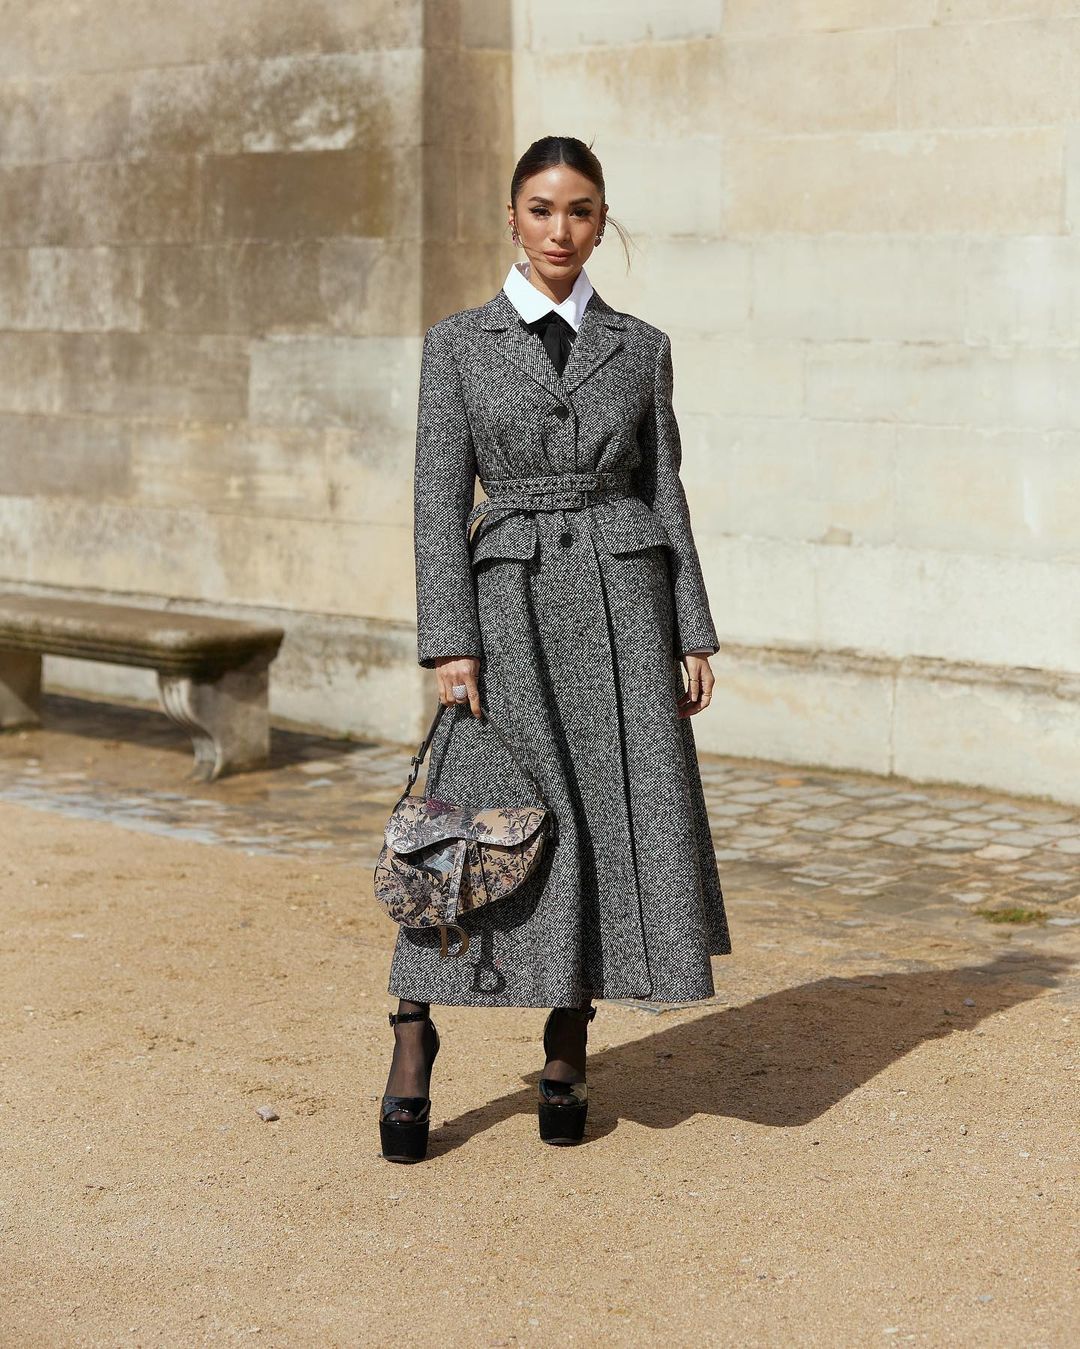 Stylish top: coats, jackets and trench coats in autumn looks 9